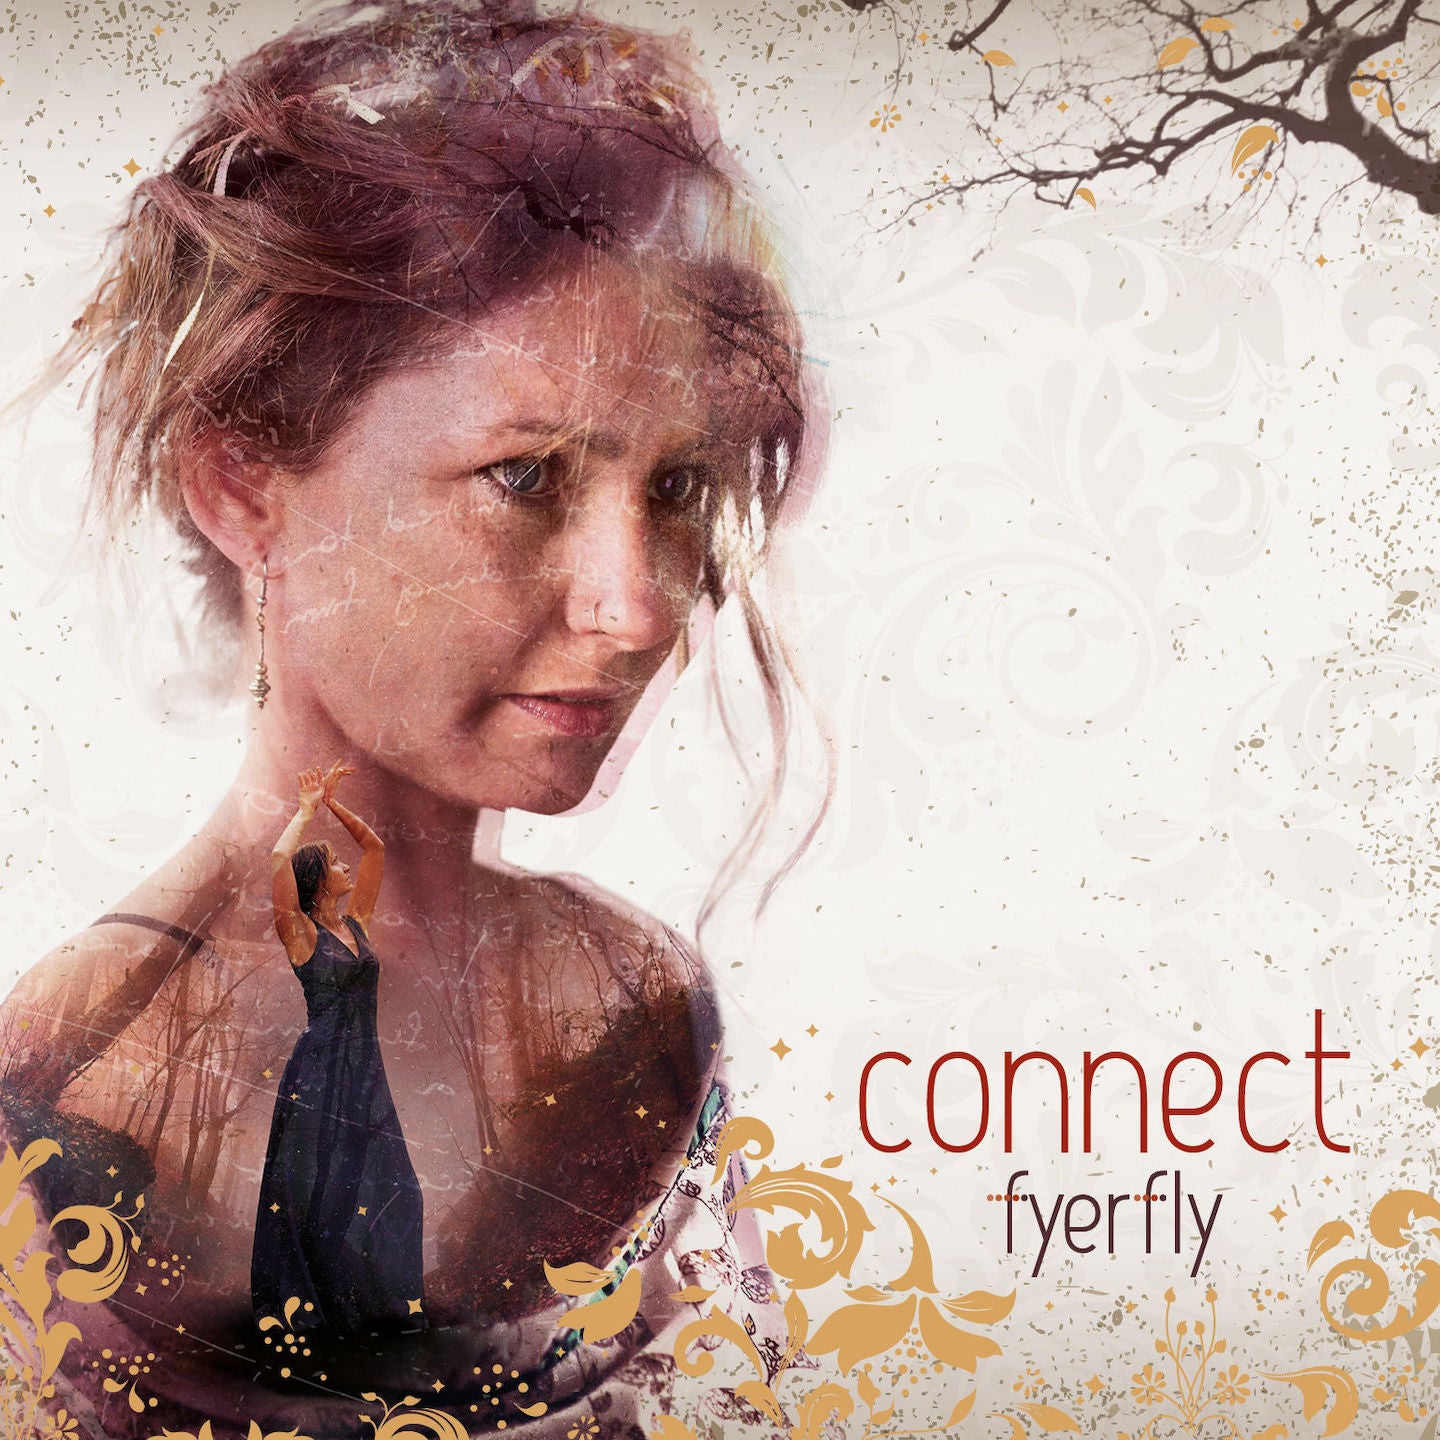 Caught Up is from the album 'Connect' by Fyerfly. Infusing elements of Alt Rock, Sadcore, Jazz and Blues, this deeply intimate and sultry album will soothe you as your soul is immersed in its serene and haunting sounds. A song about mourning the loss of a past love. Of trying to replace them and needing to face reality. Interweaving harmonies, dreamy and emotional.